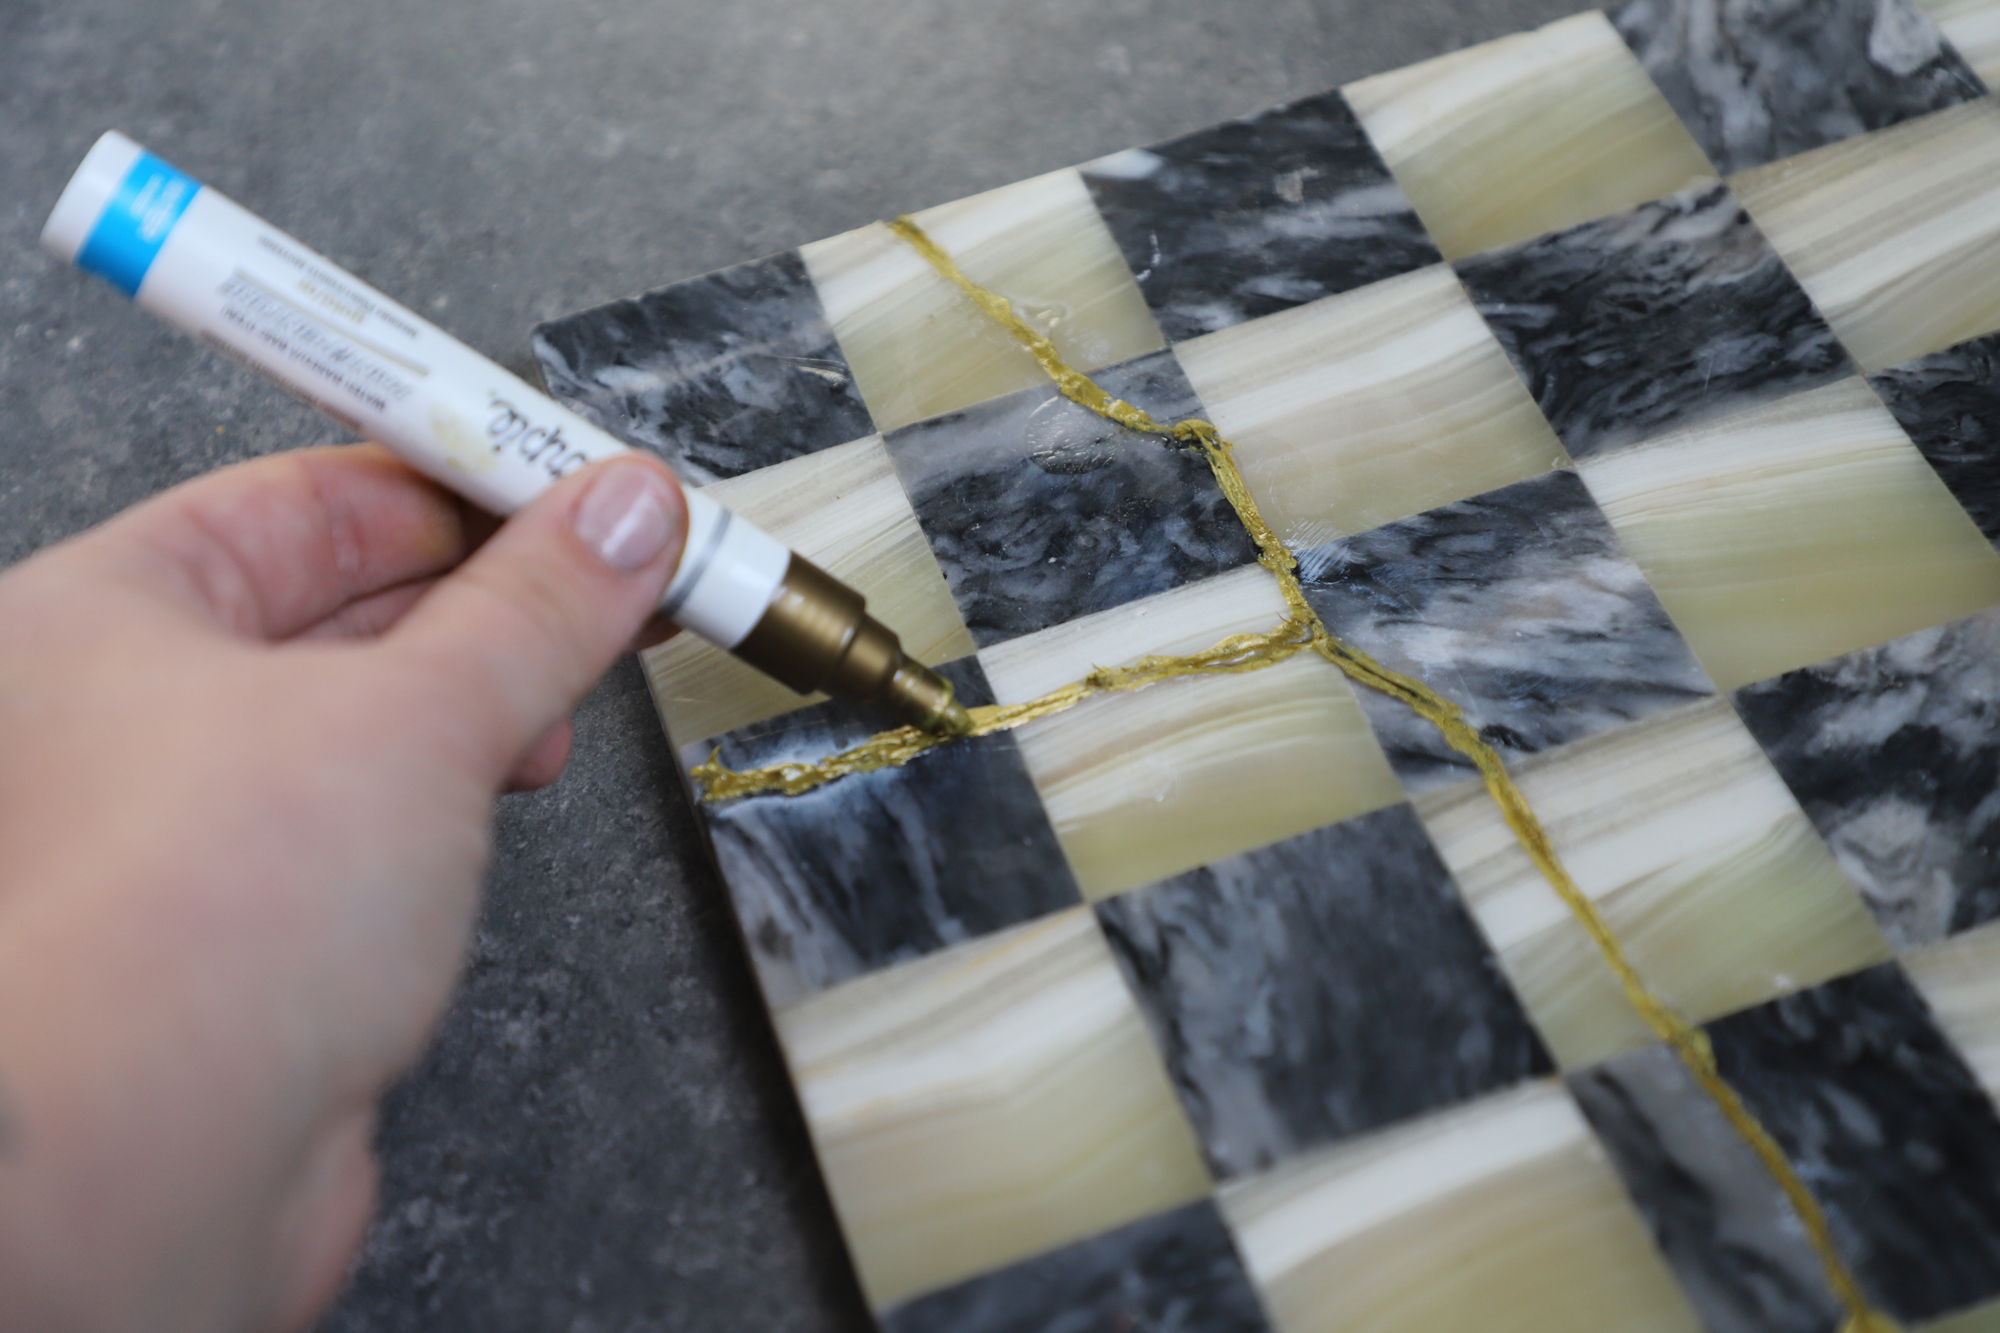 Using gold paint pen to add detail to glued chess board.